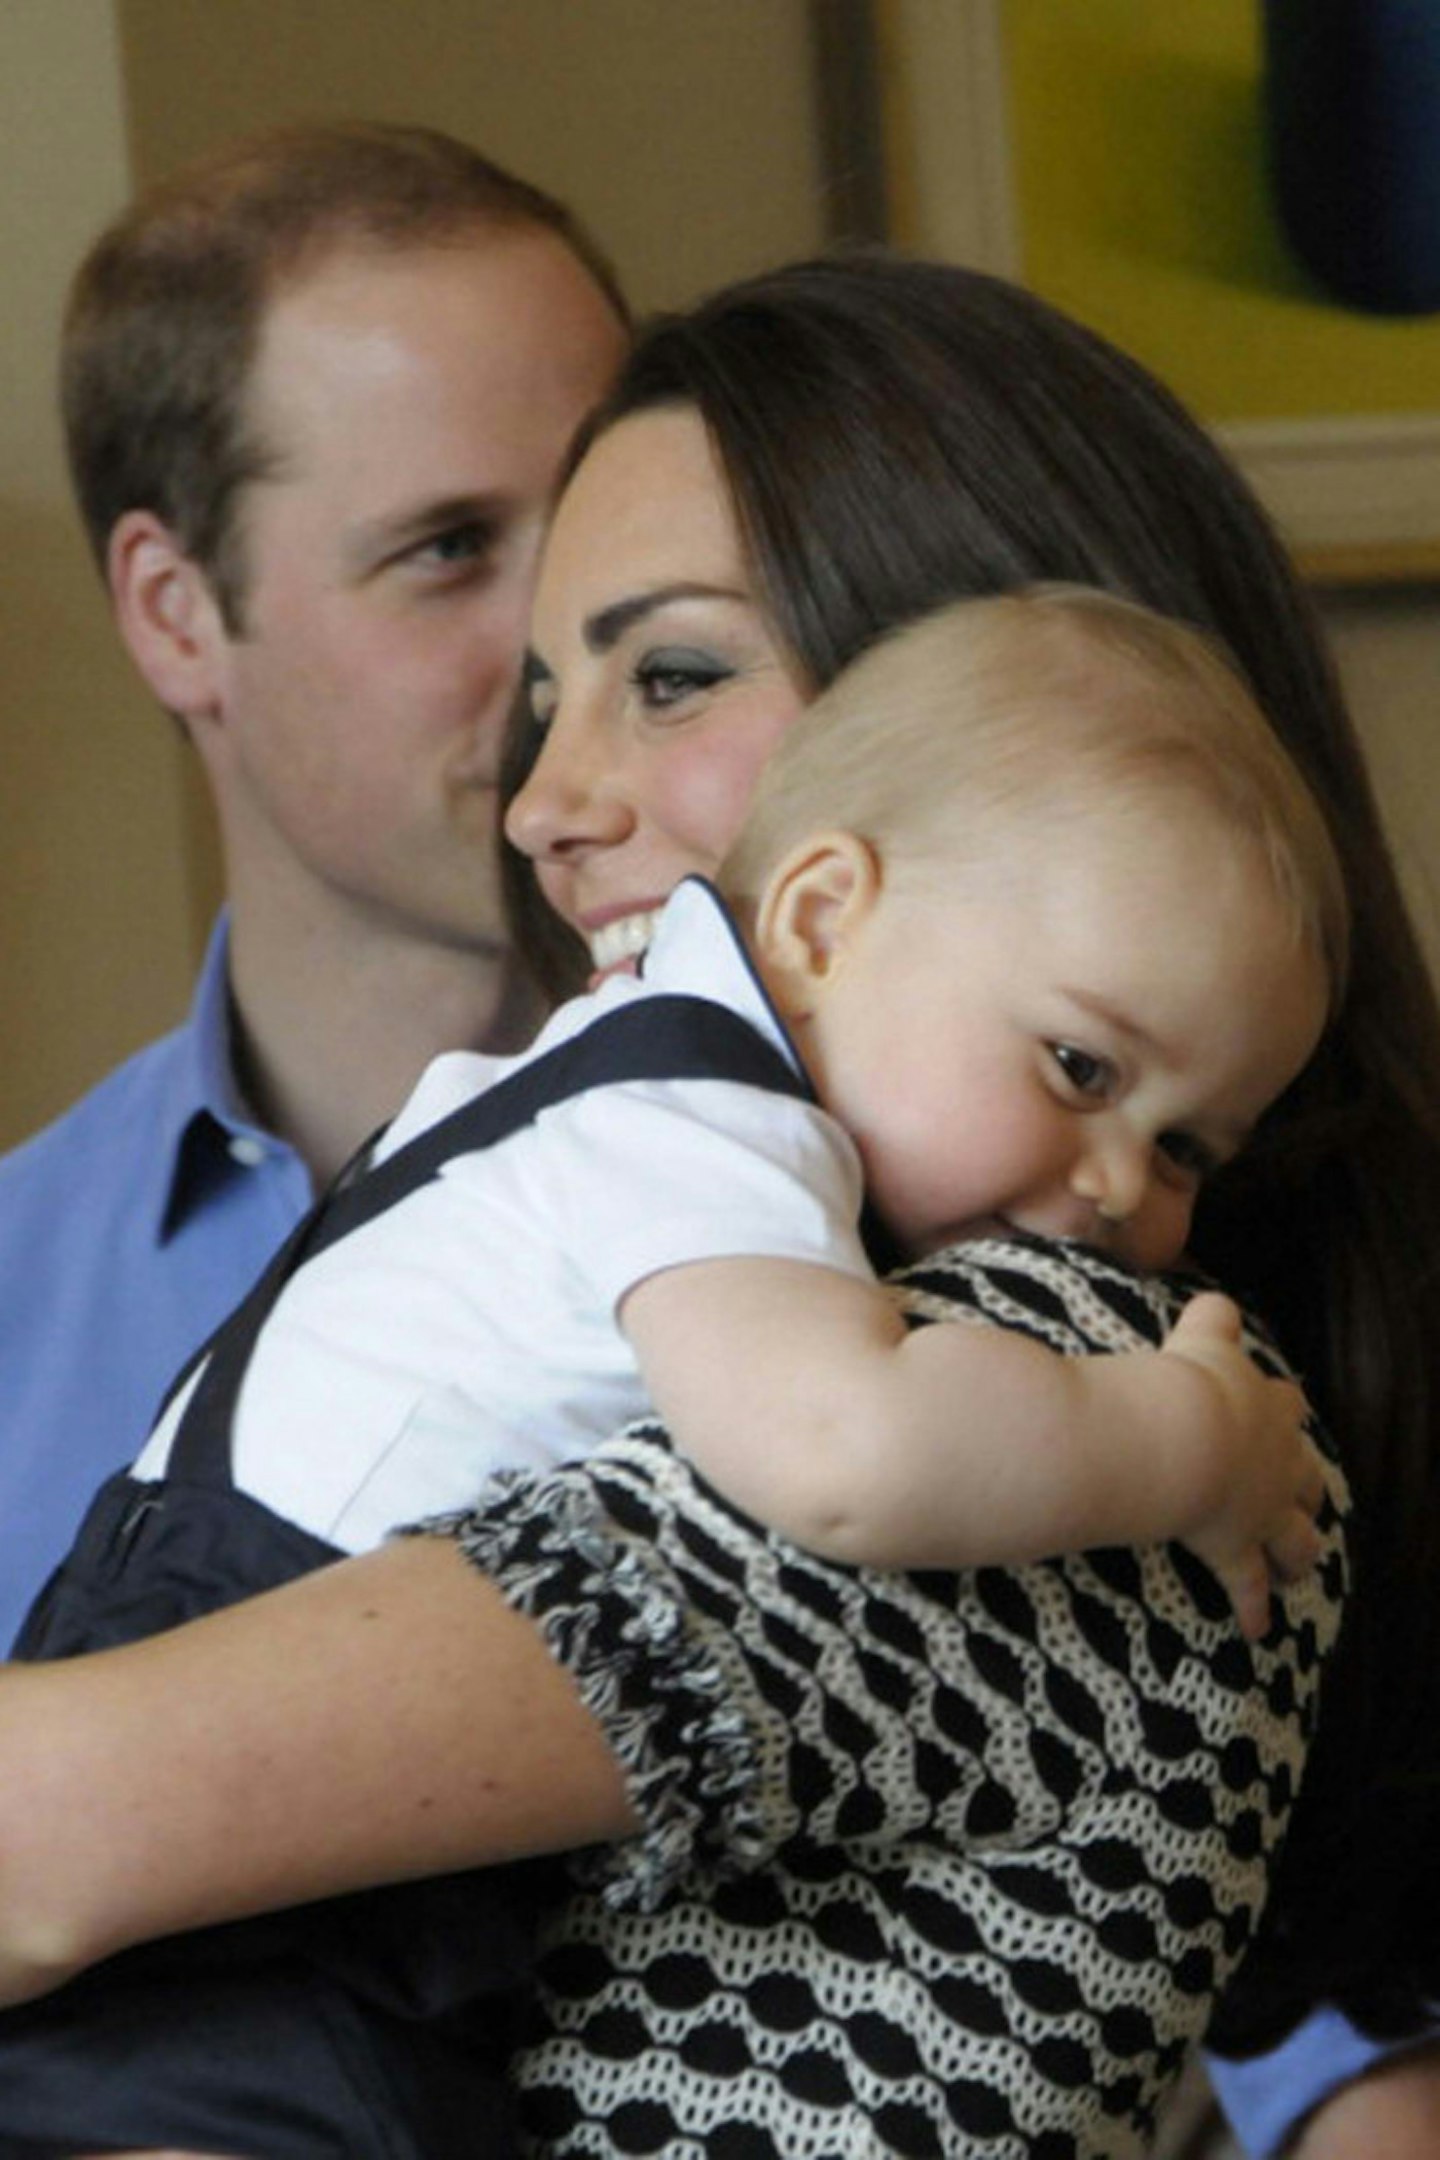 51-50. Cuddles with Prince George in Wellington, New Zealand in April 2014